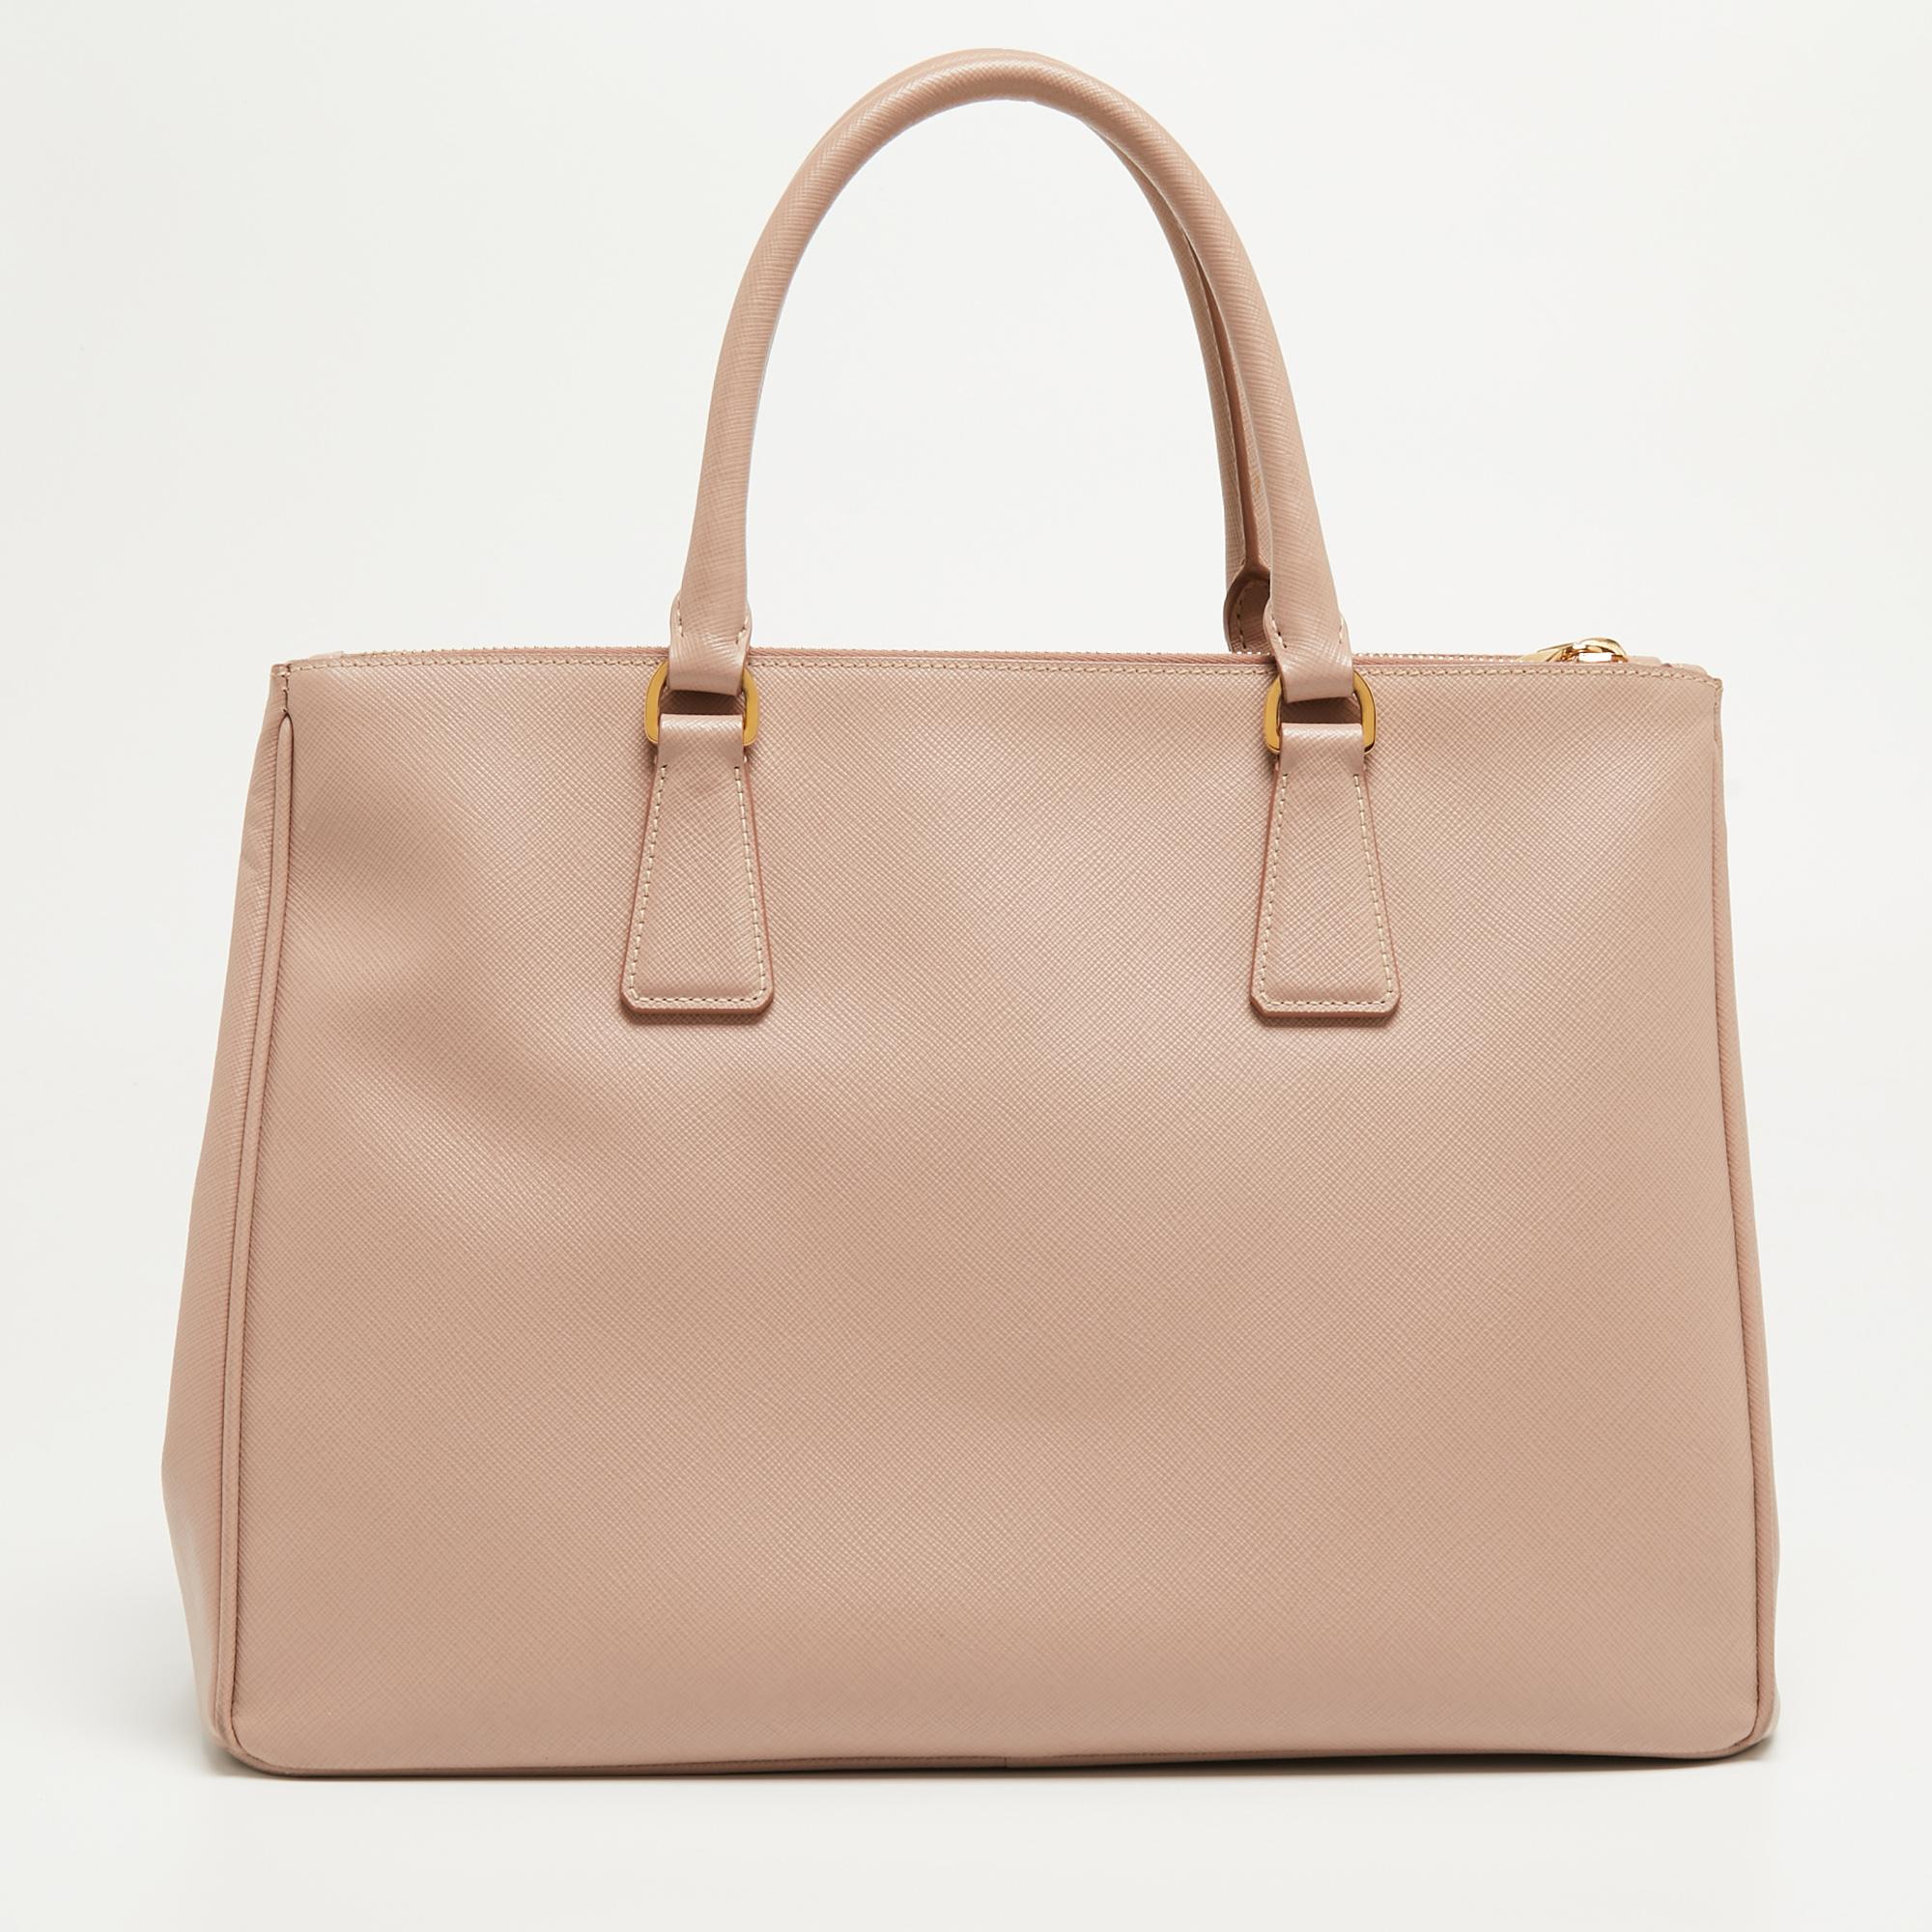 This alluring tote bag for women has been designed to assist you on any day. Convenient to carry and fashionably designed, the Prada tote is cut with skill and sewn into a great shape. It is well-equipped to be a reliable accessory.

Includes: